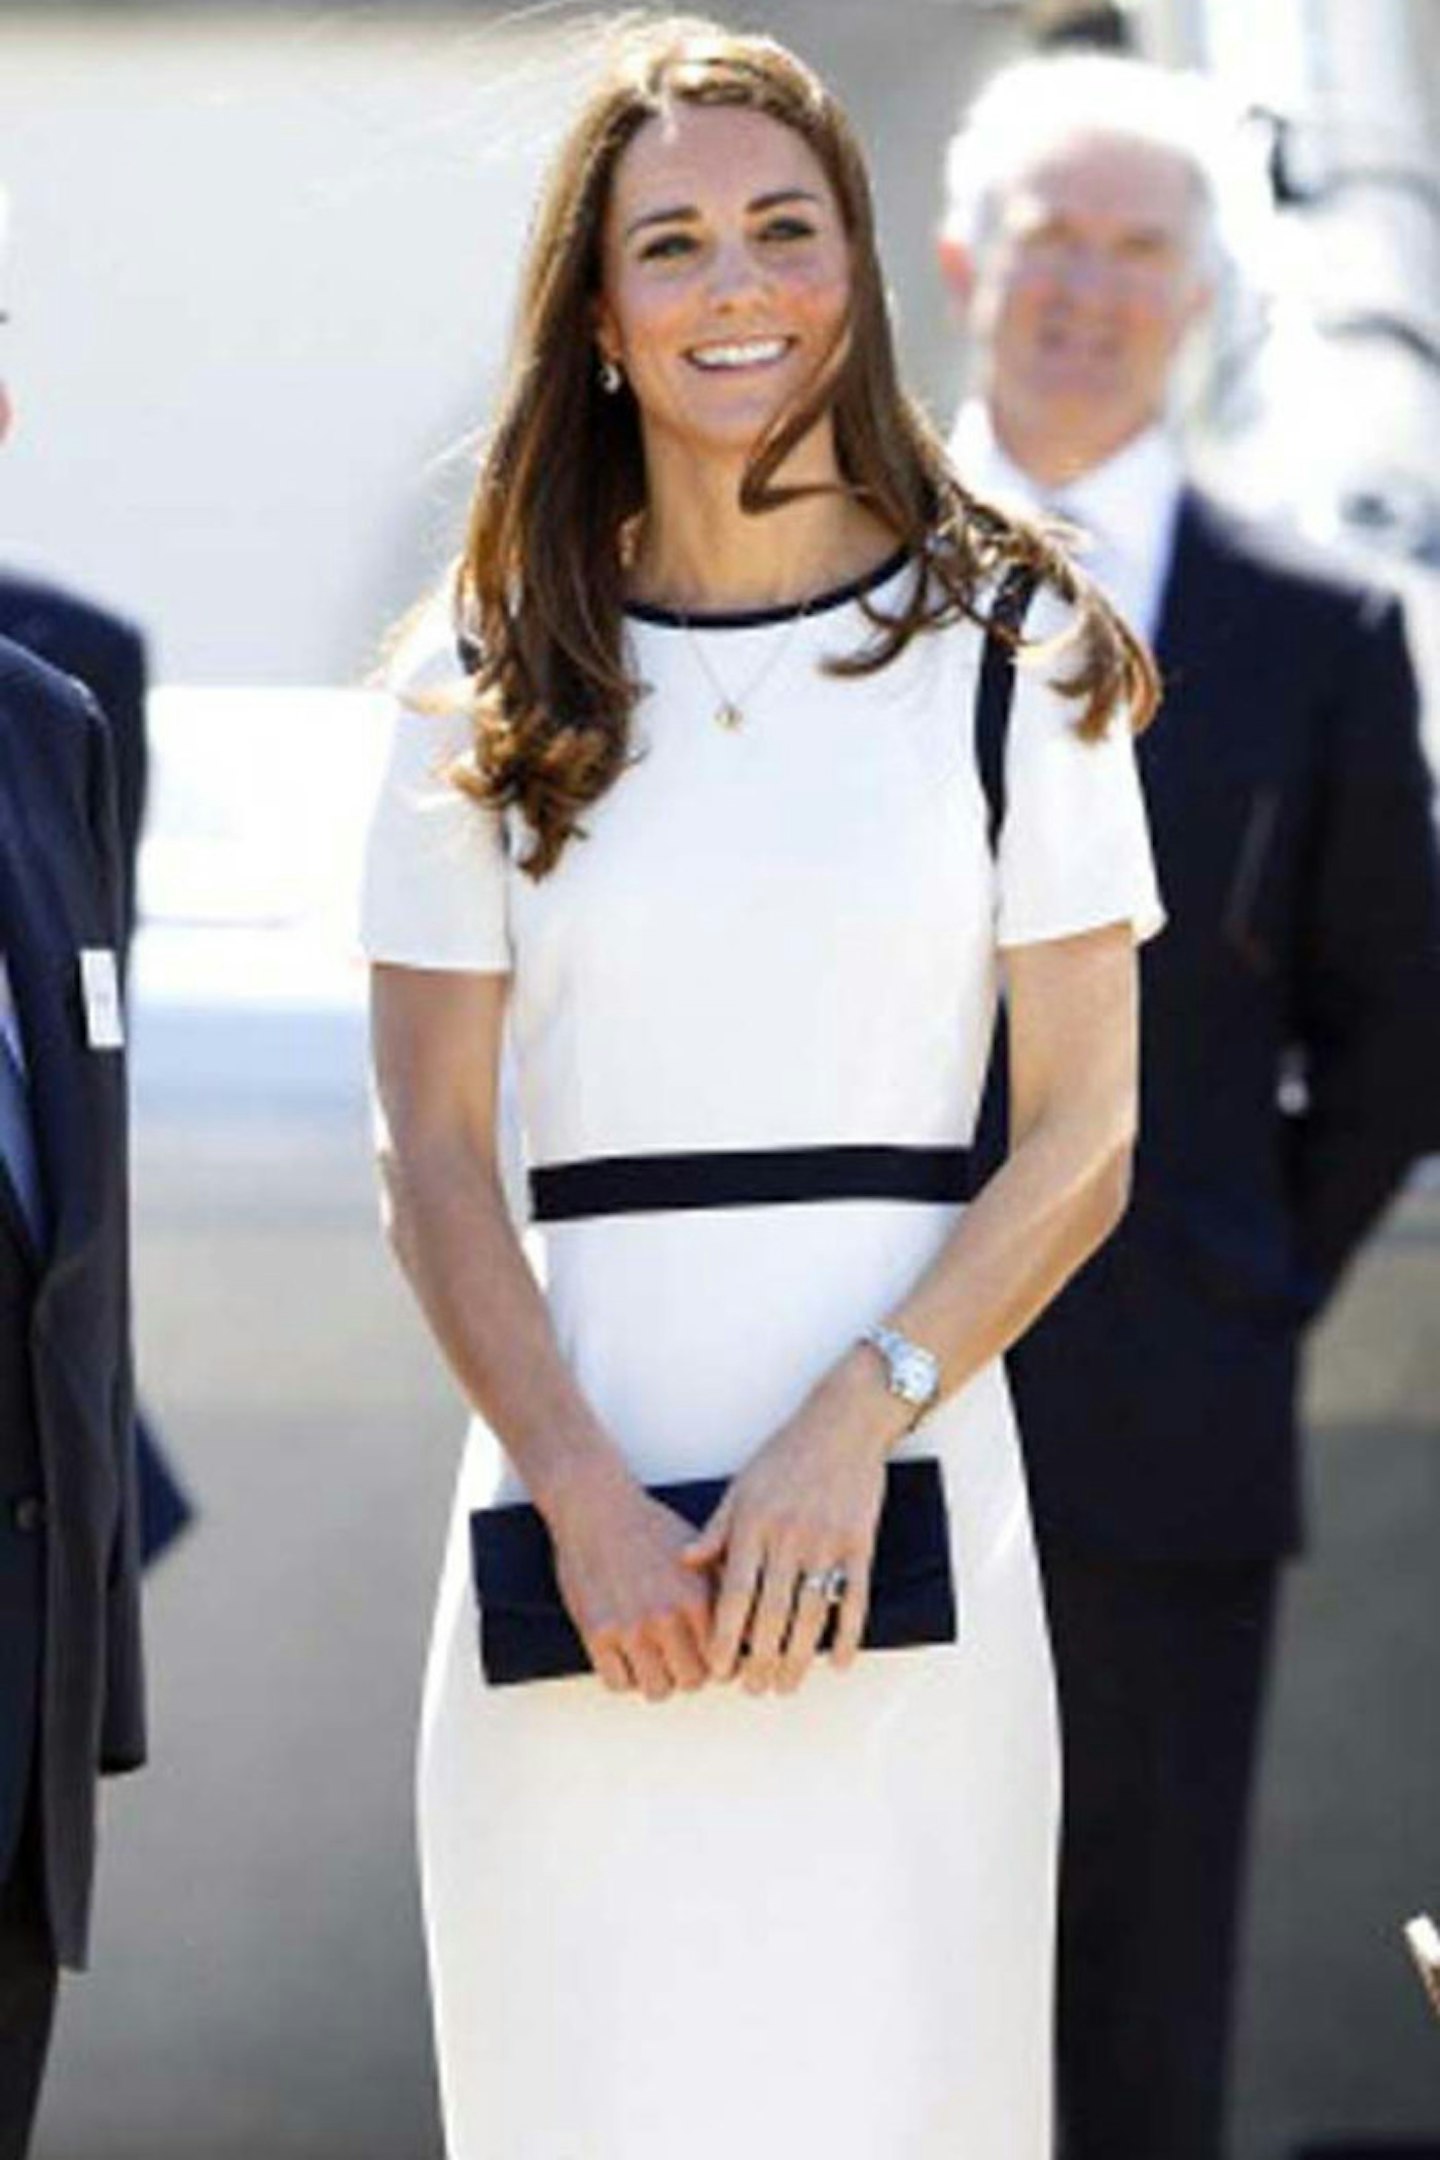 Kate Middleton at the Ben Ainslie Racing America's Cup Launch Event, 10 June 2014